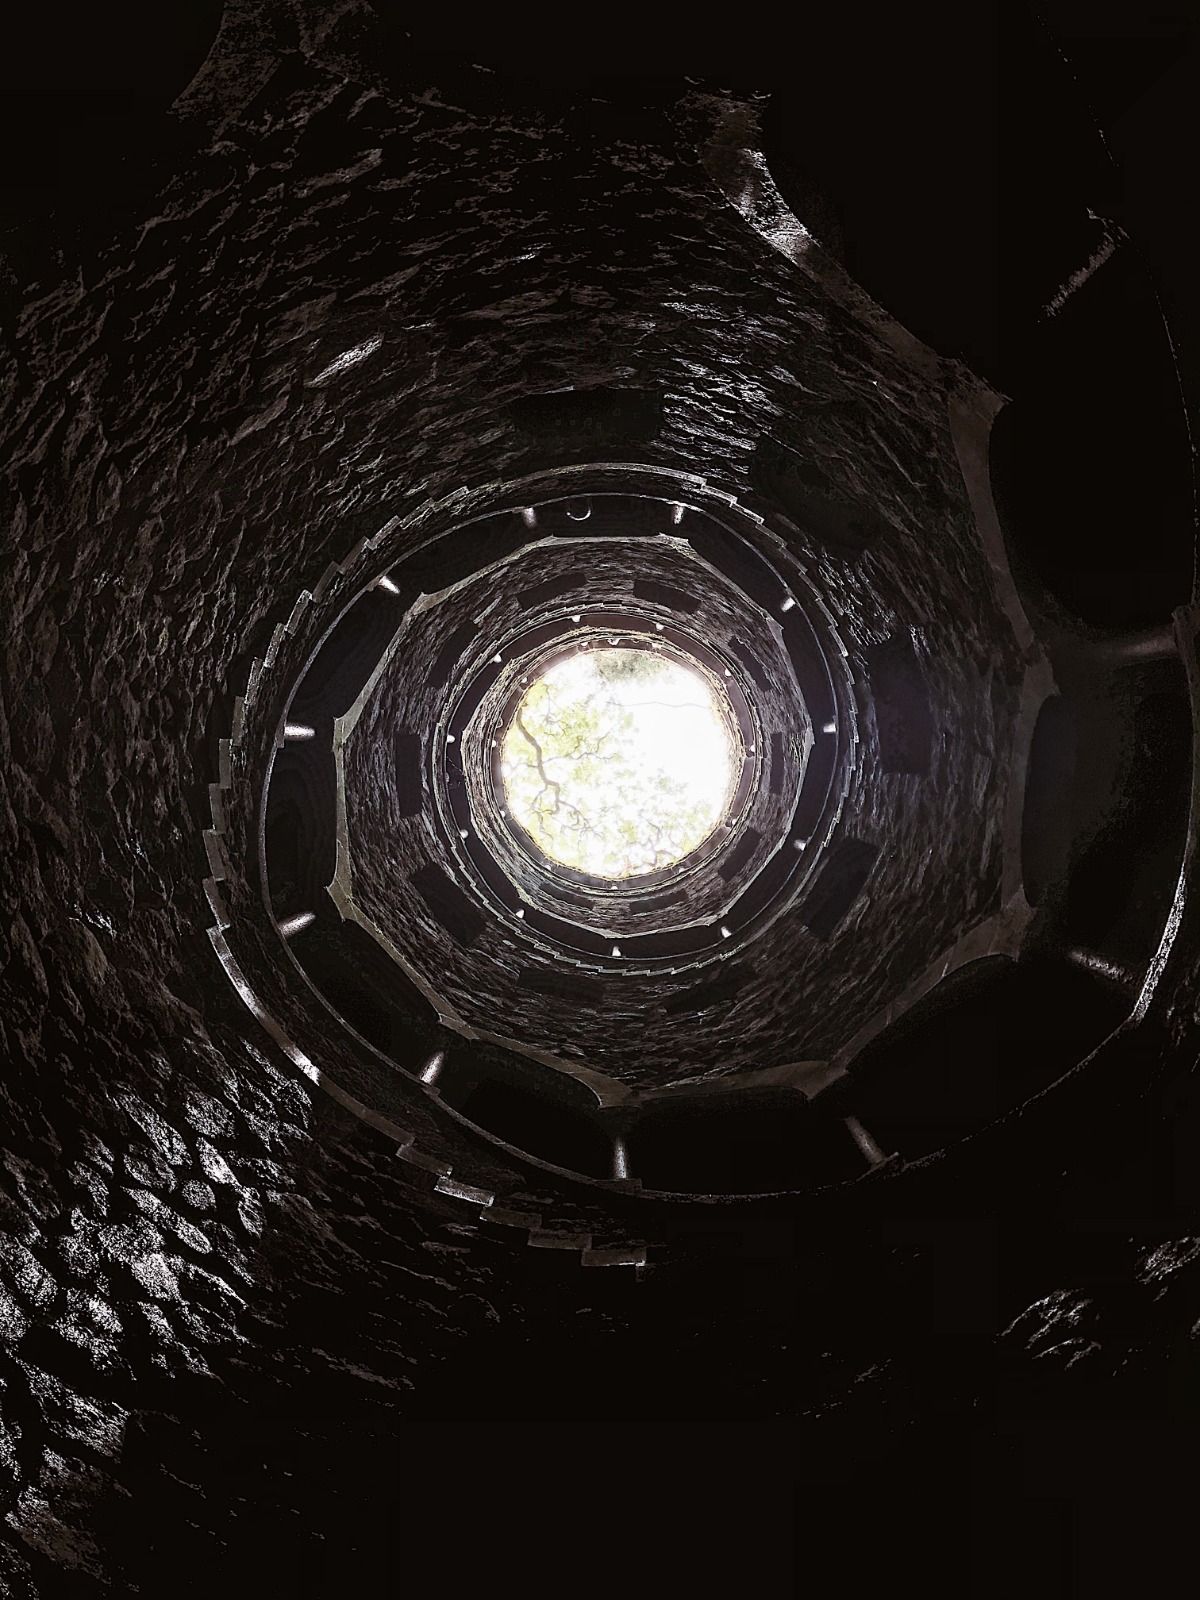 Photo of Deep Hole by ArtHouse Studio from Pexels